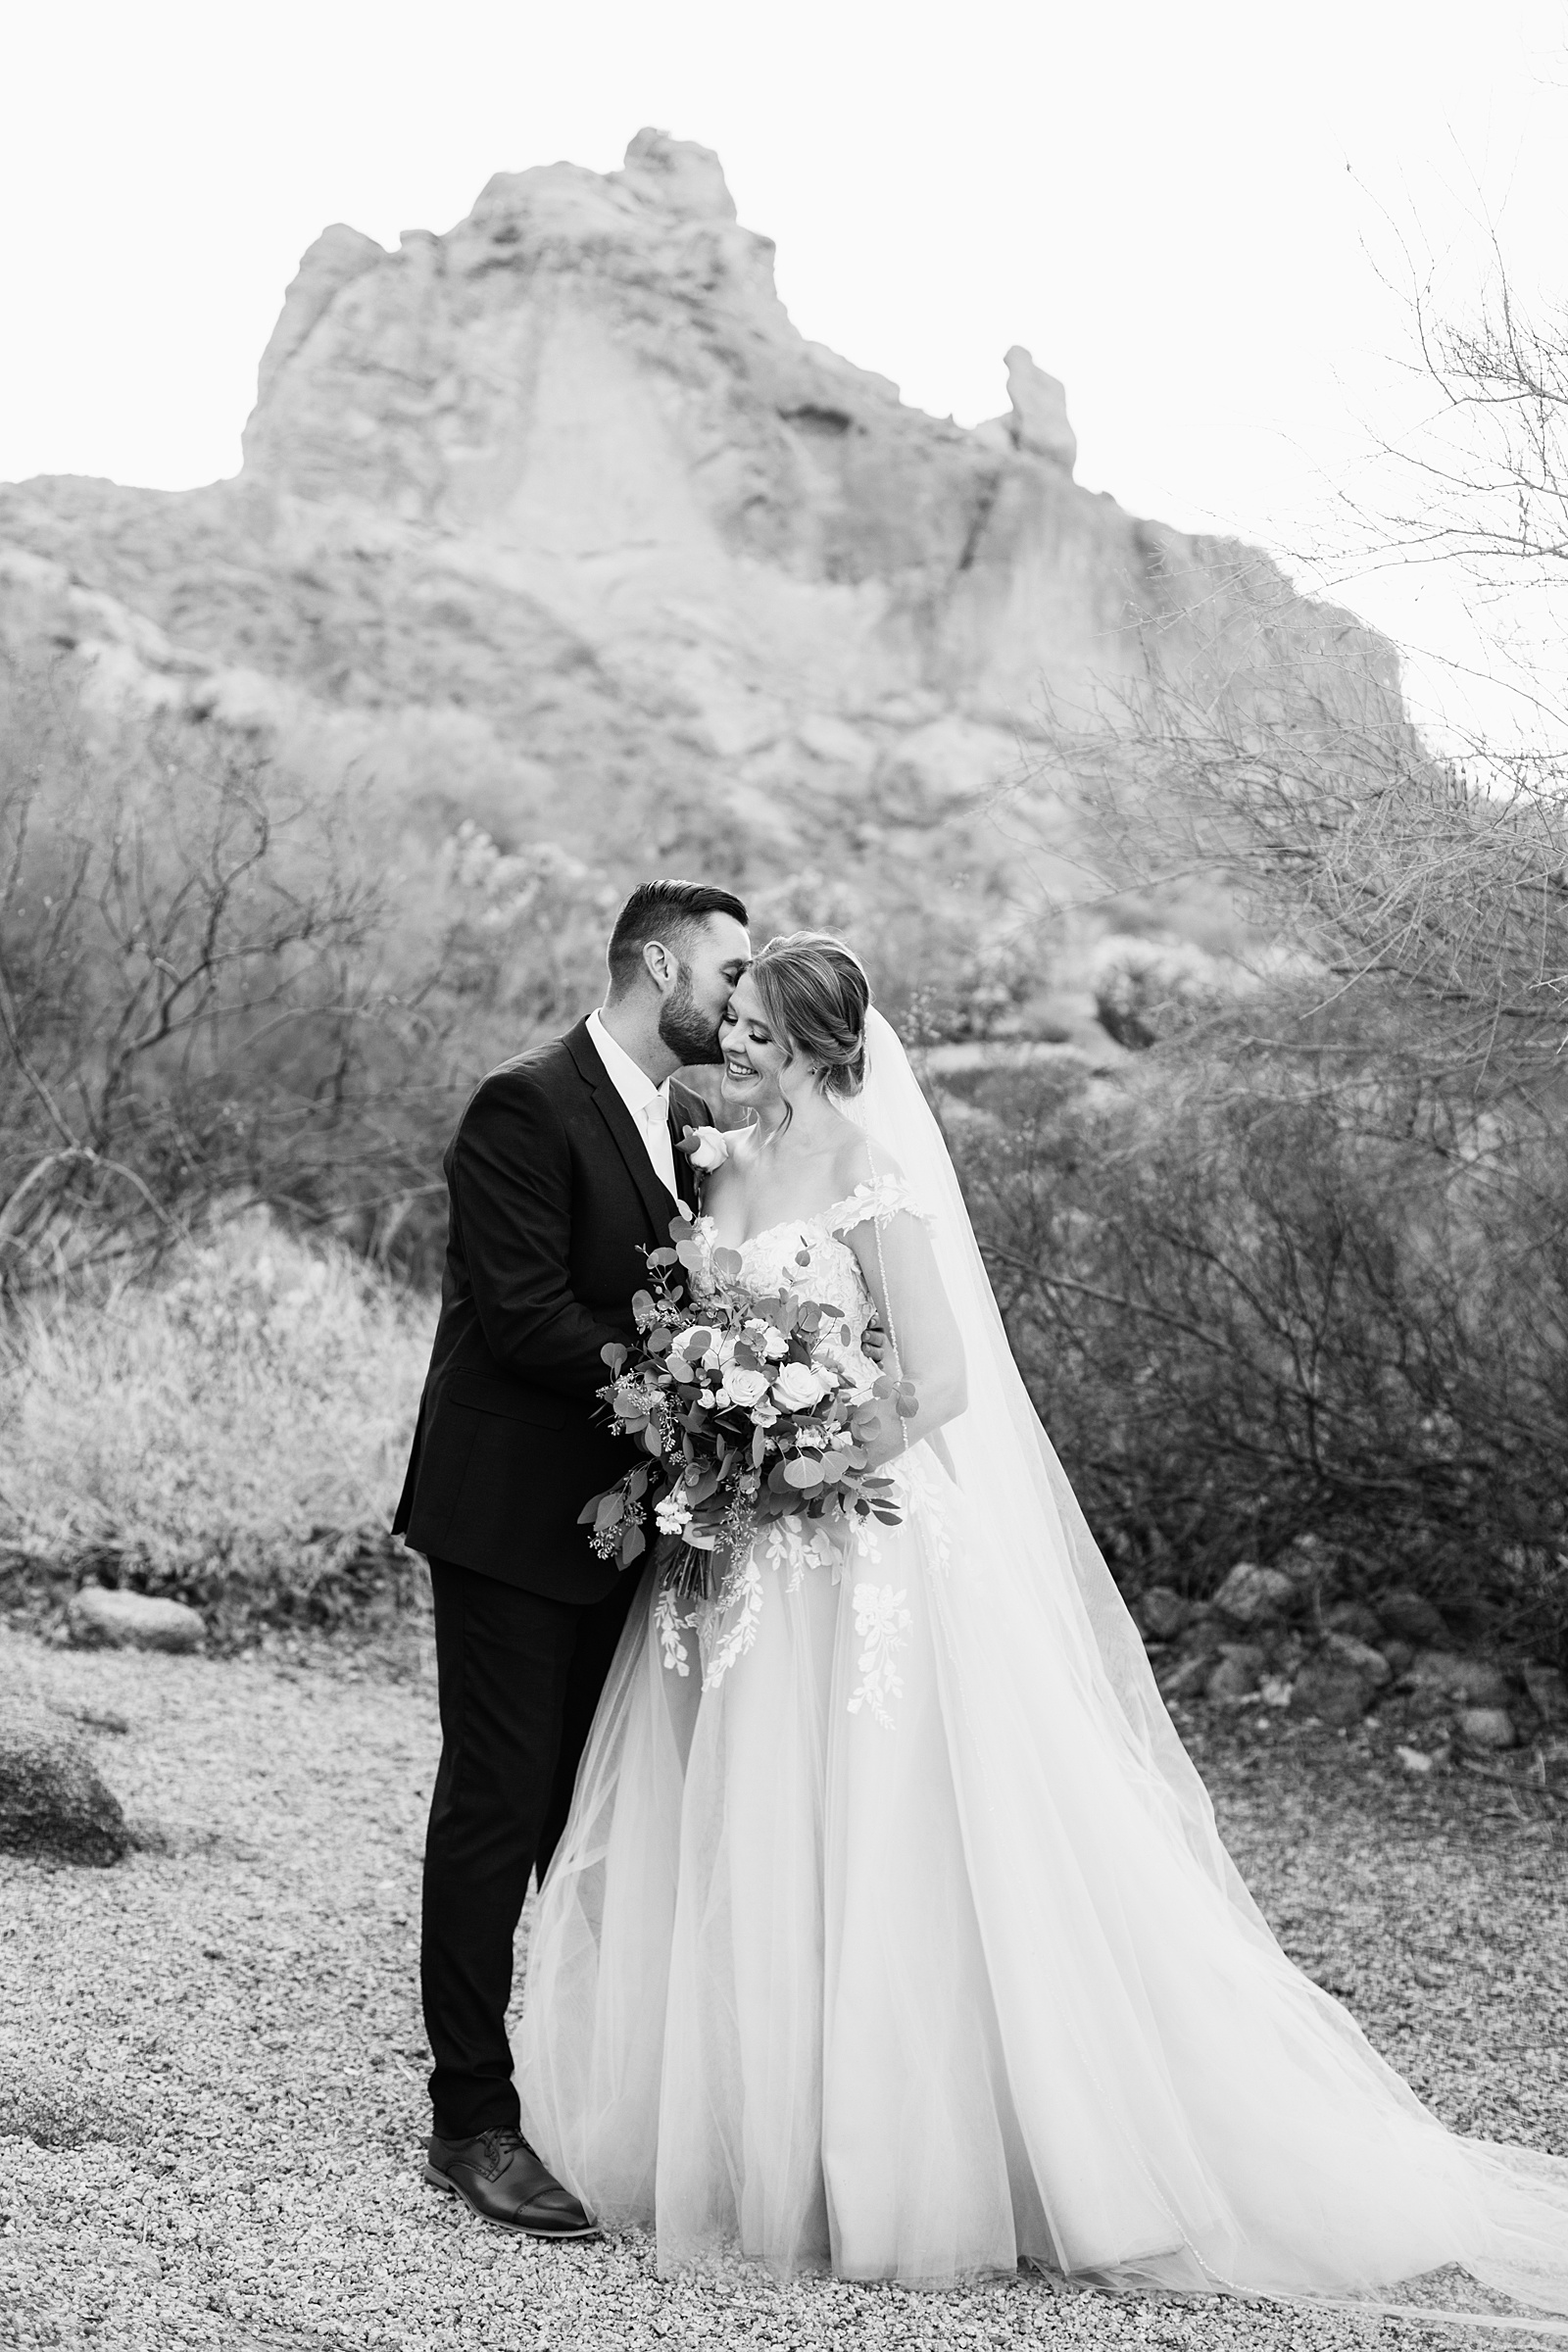 Bride & Groom share an intimate moment during their Sanctuary wedding by Phoenix wedding photographer Juniper and Co Photography.